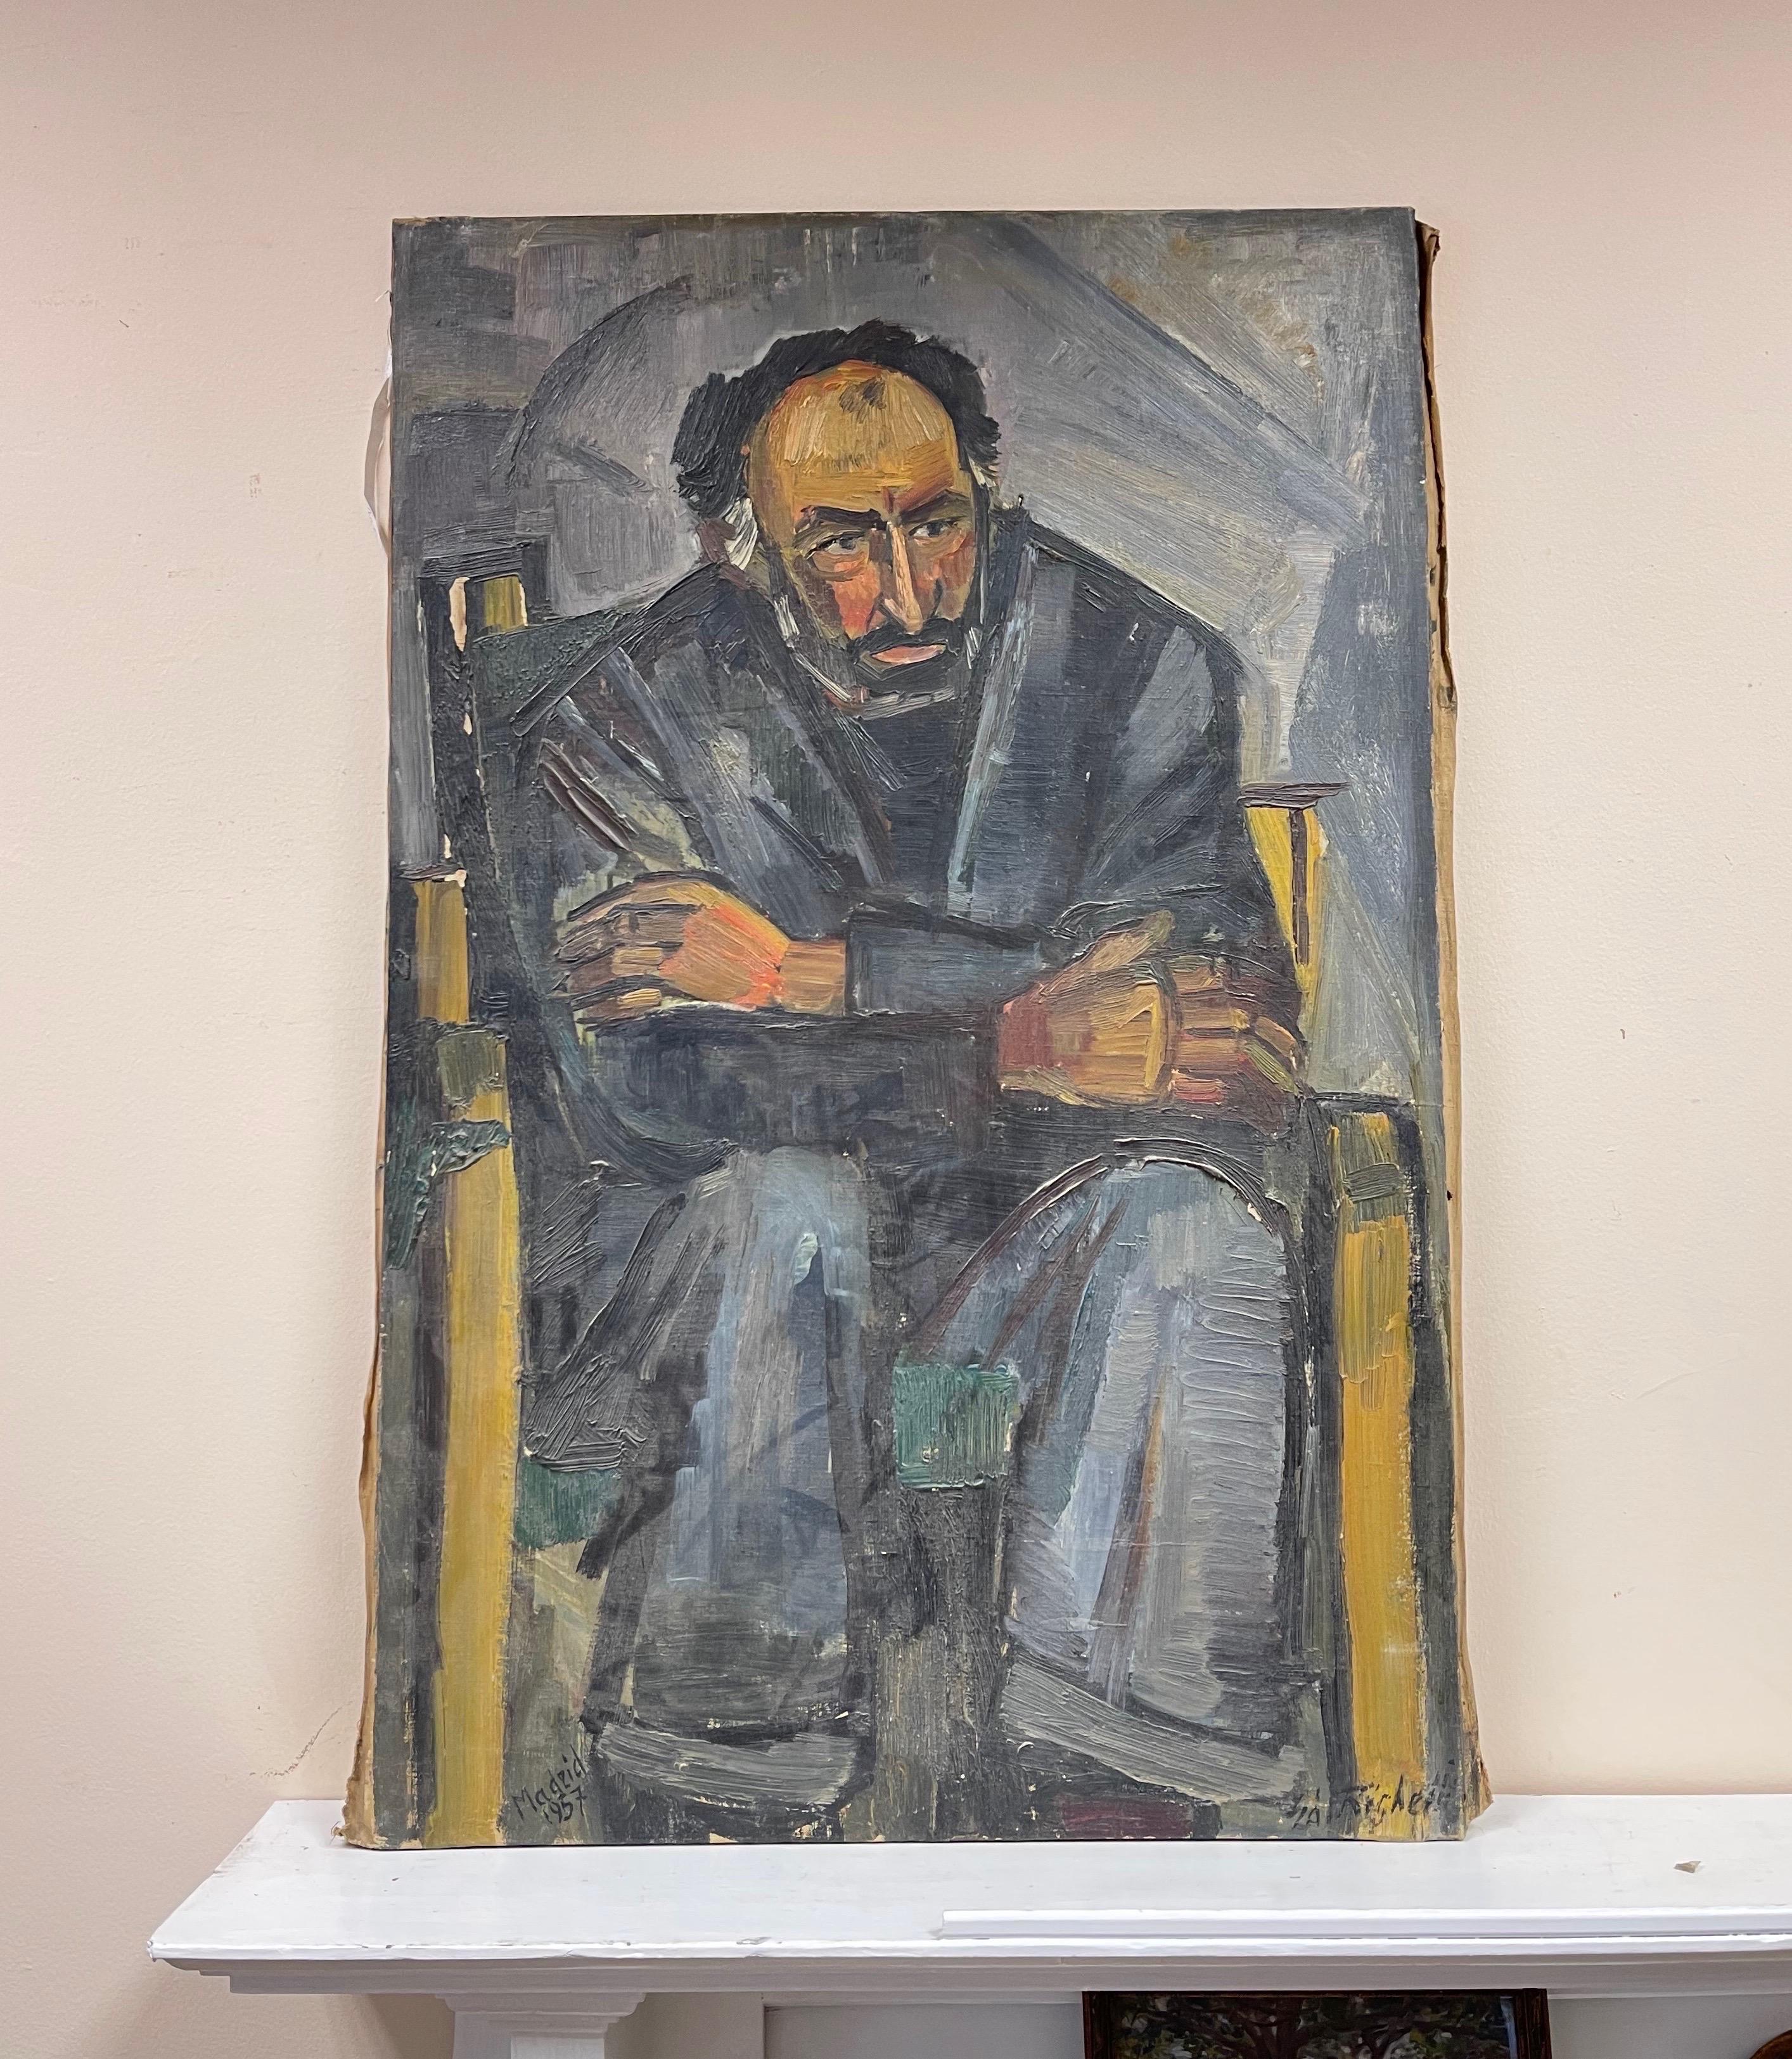 Original French Mid Century Post-Impressionist Oil - Man Seated on Chair, 1957 - Painting by Édouard Righetti (1924-2001)